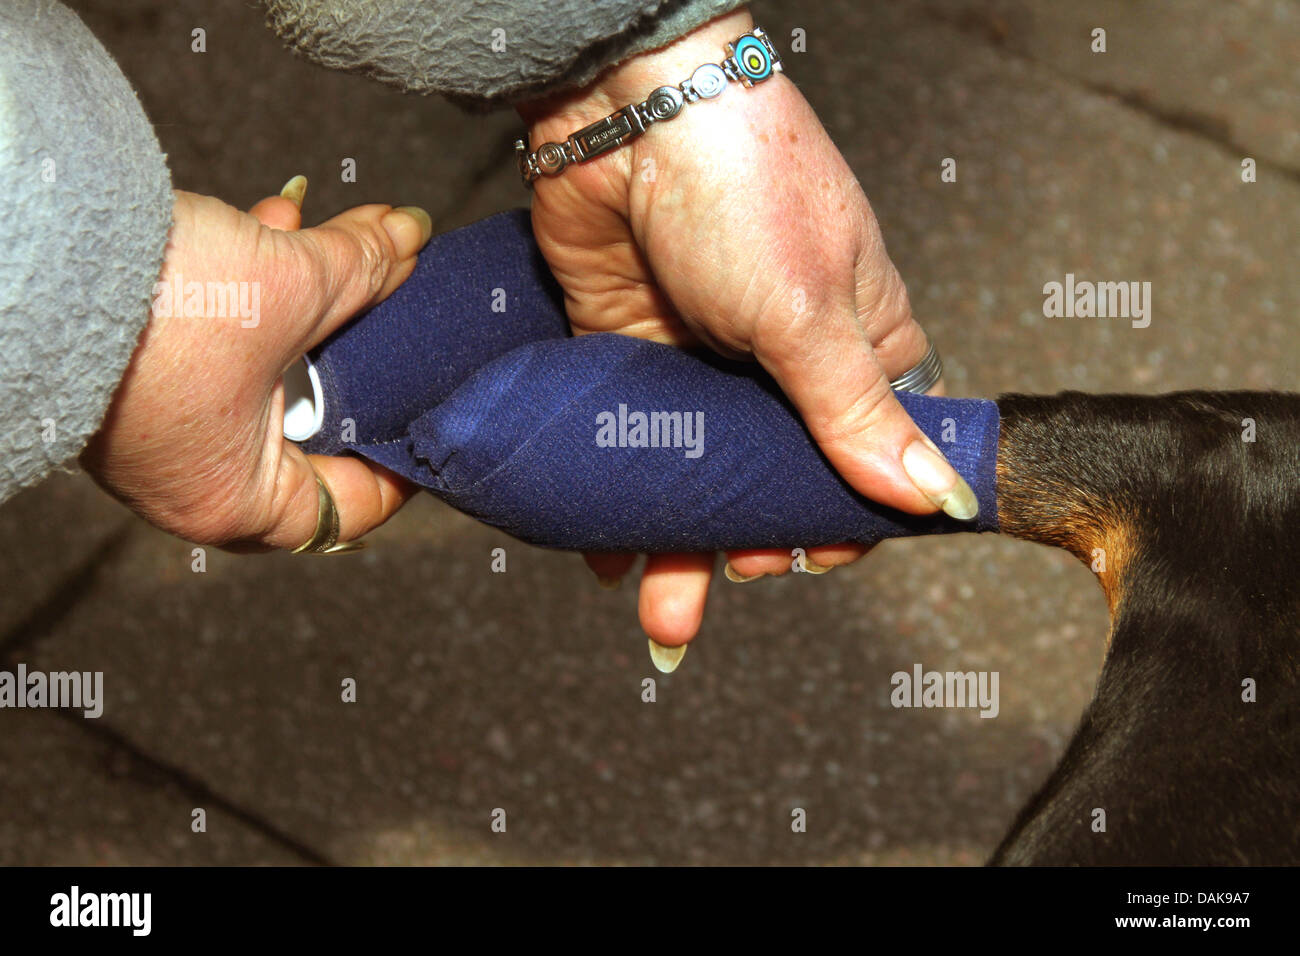 woman taping up a dog's paw Stock Photo